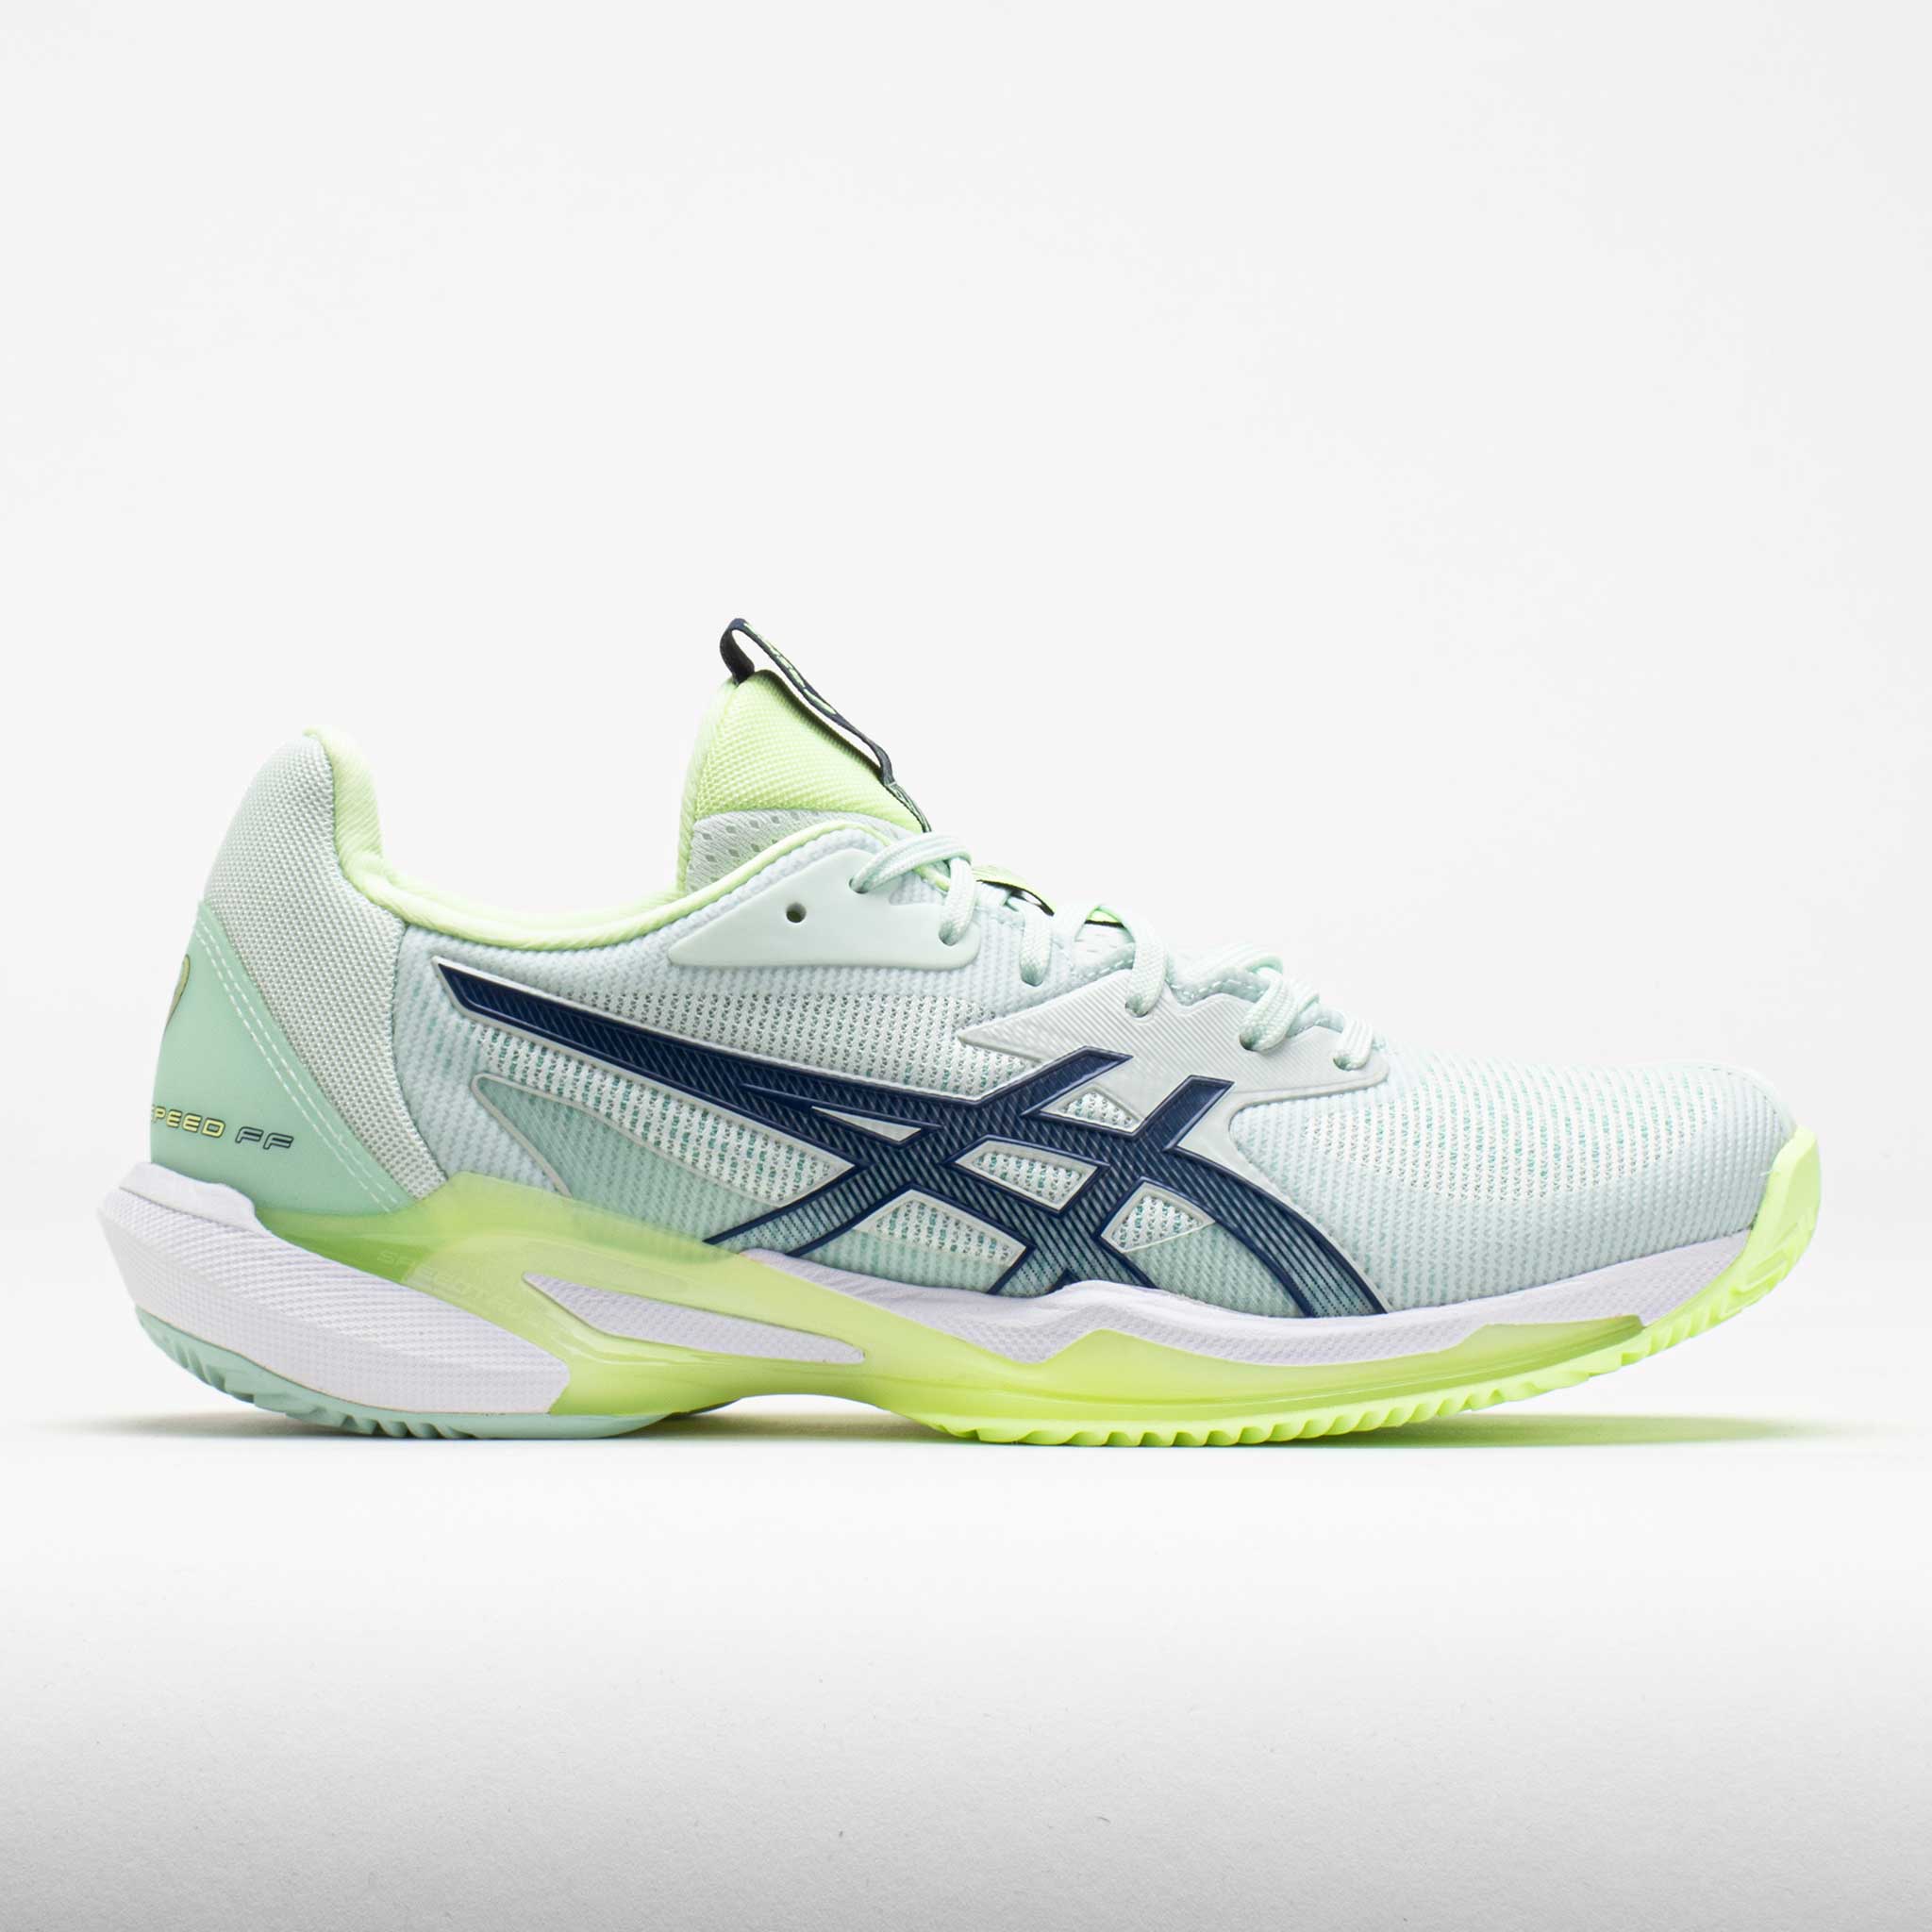 Titolo | Buy Asics sneakers and sportwear online here at Titolo